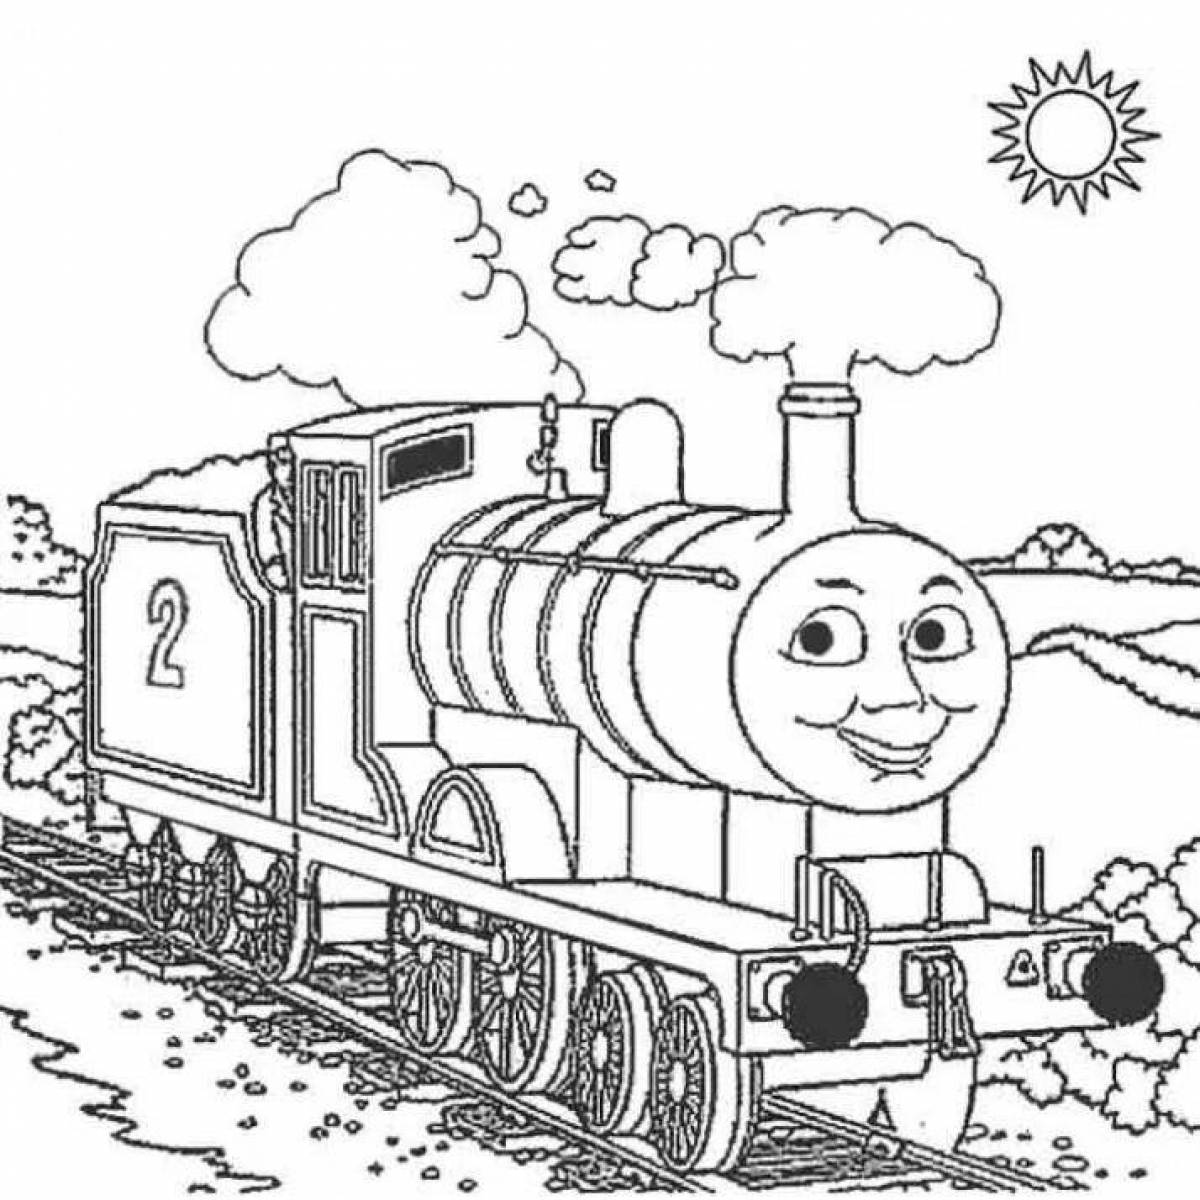 Coloring thomas the tank engine obsessed with flowers